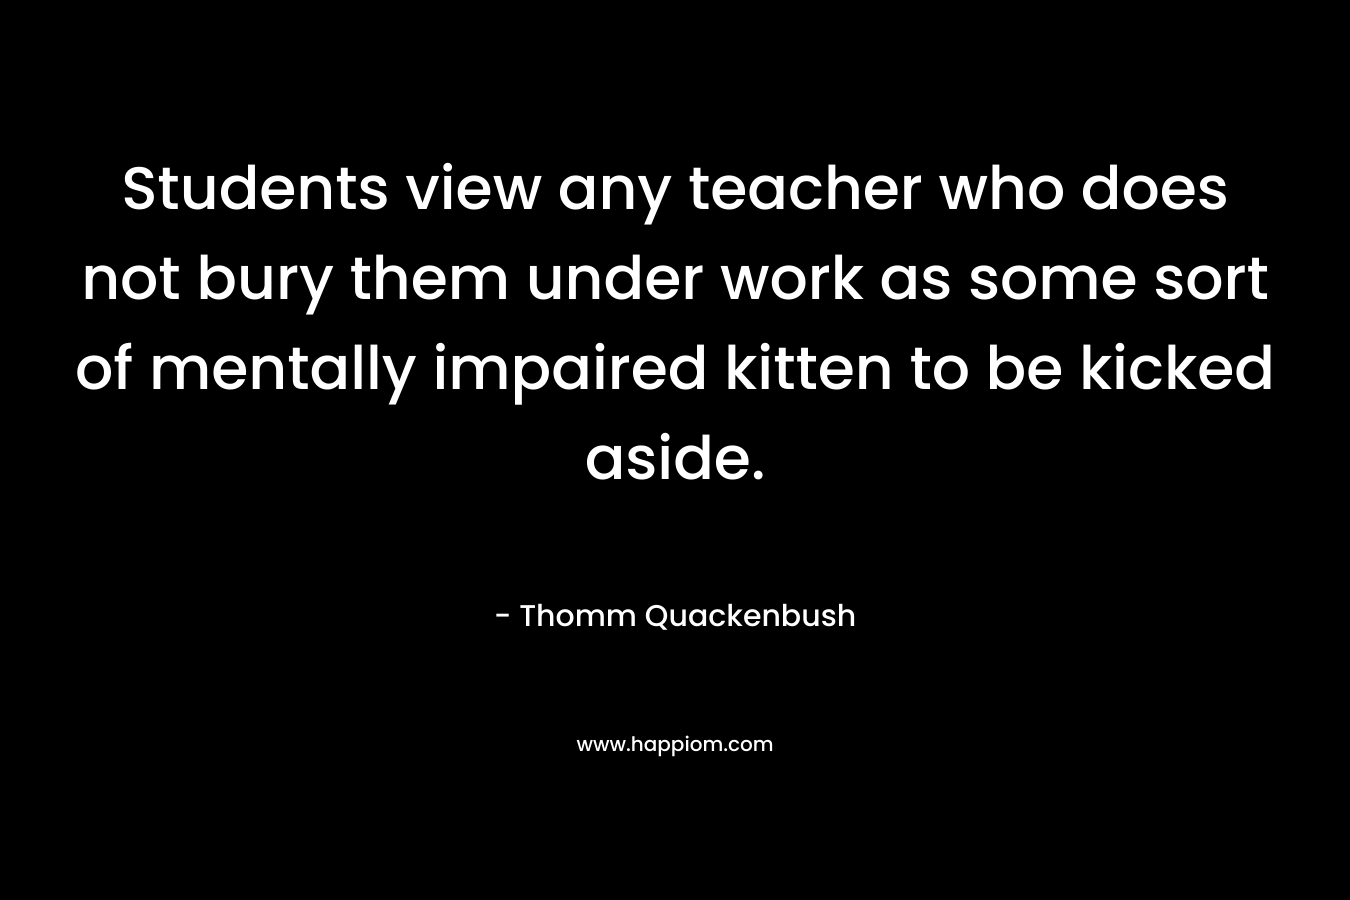 Students view any teacher who does not bury them under work as some sort of mentally impaired kitten to be kicked aside. – Thomm Quackenbush